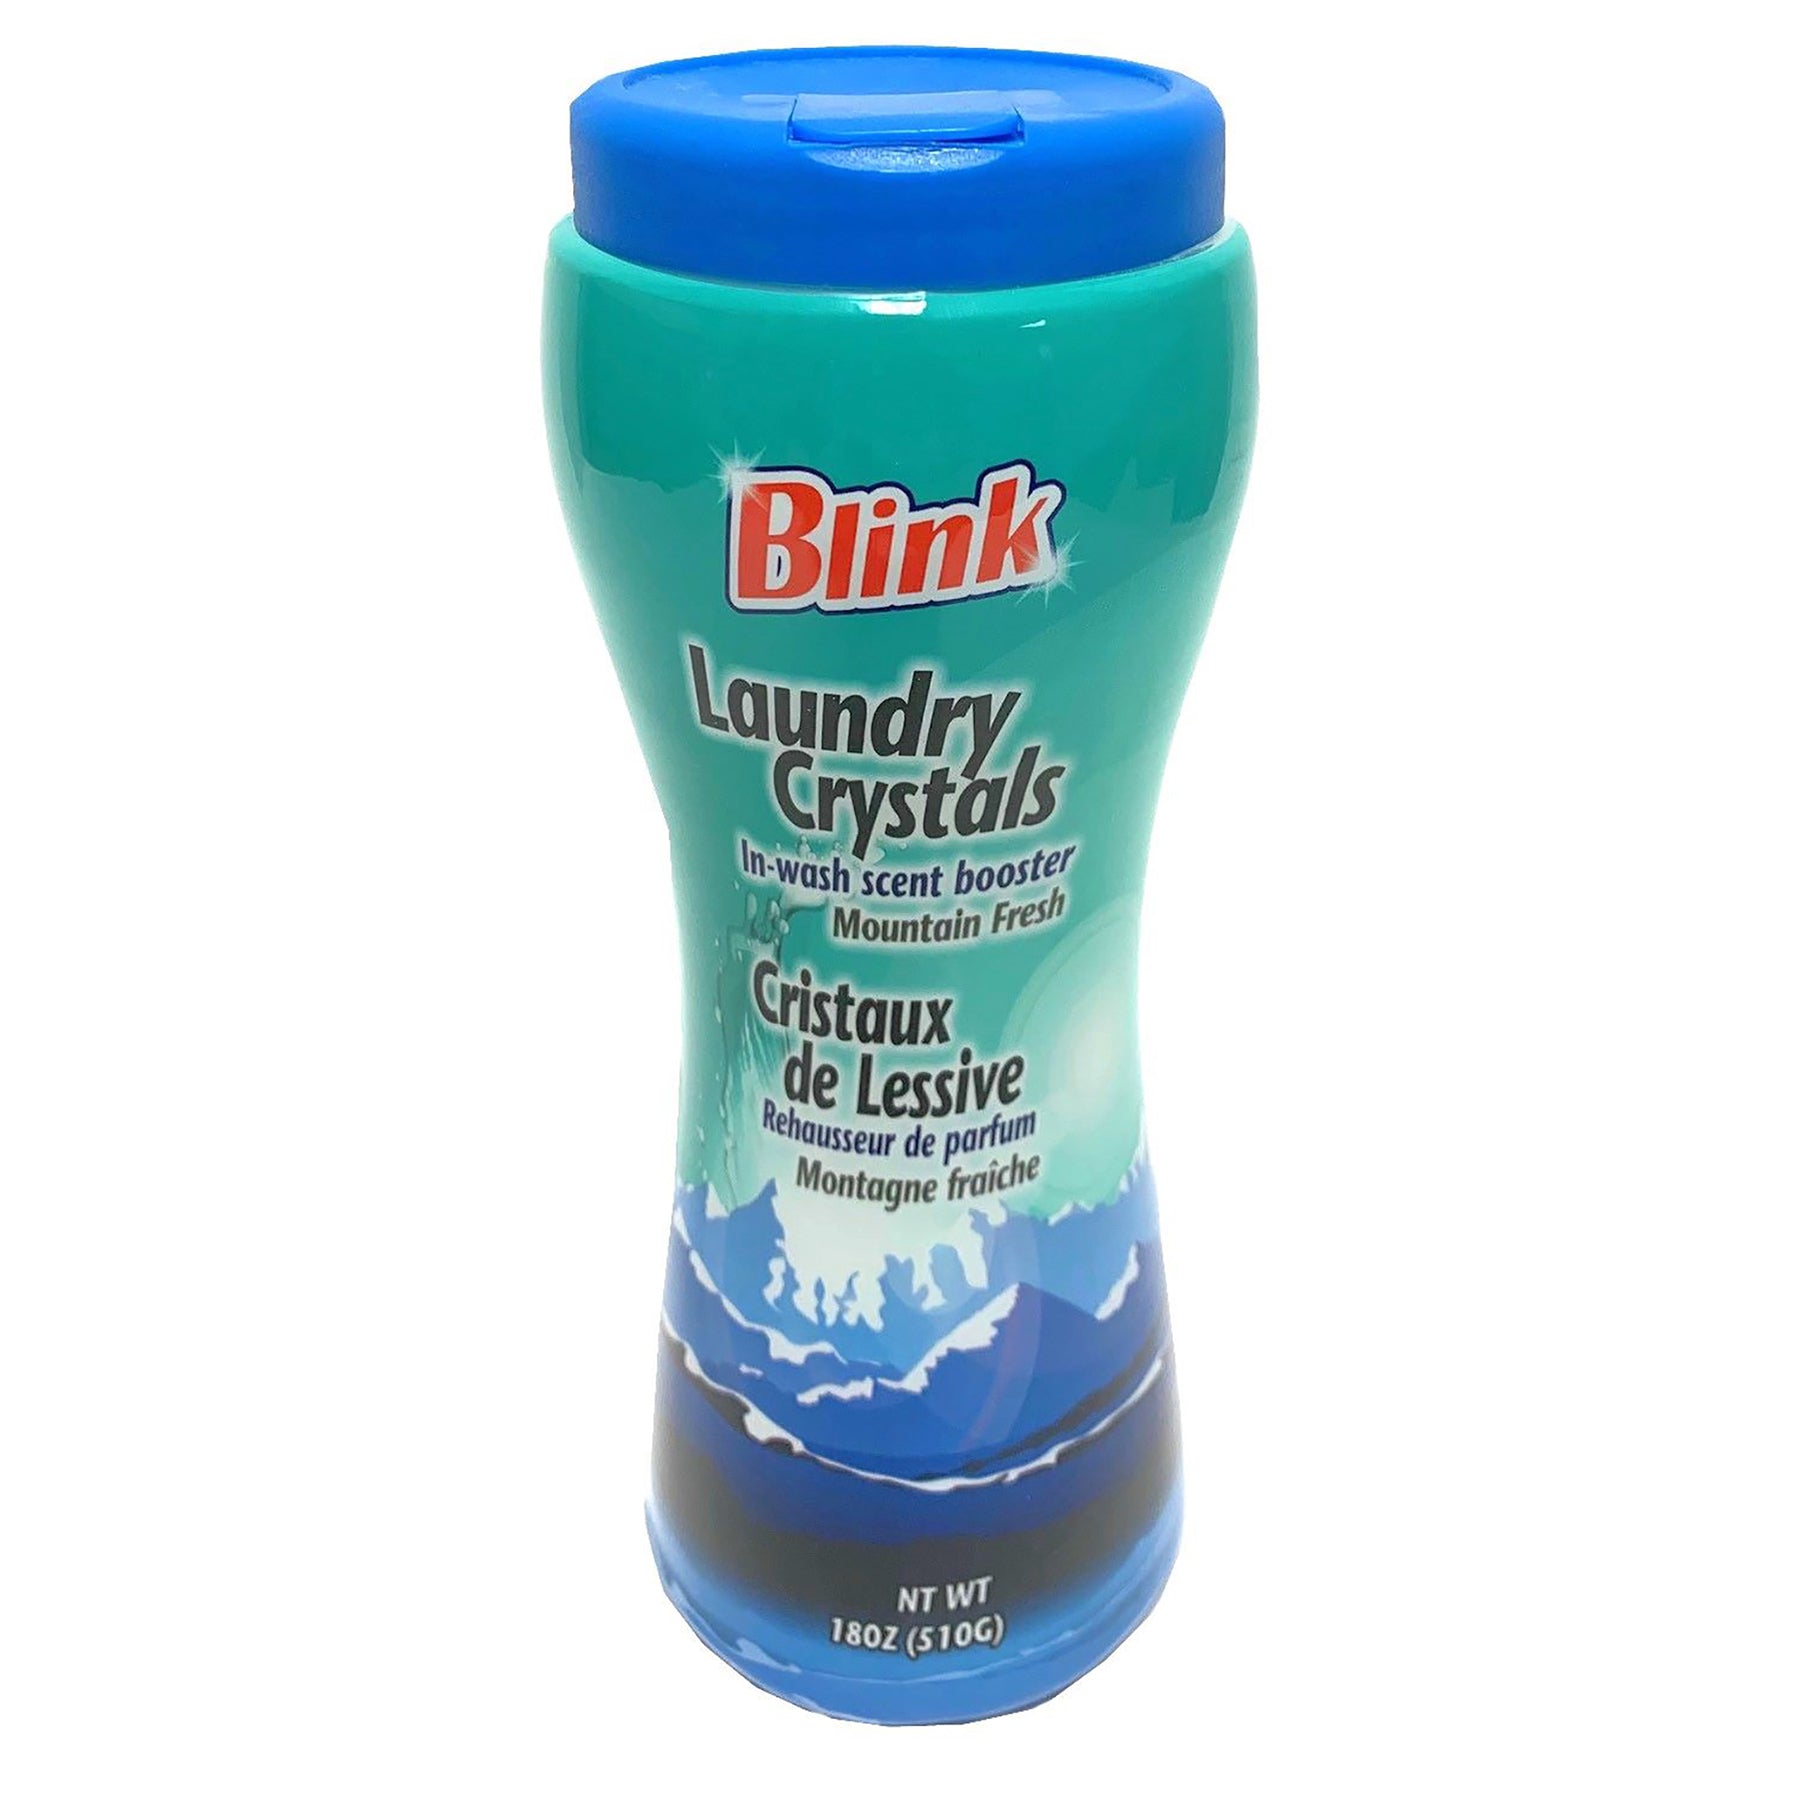 Blink Laundry Crystal in-wash Scent Booster - Mountain Fresh 18oz